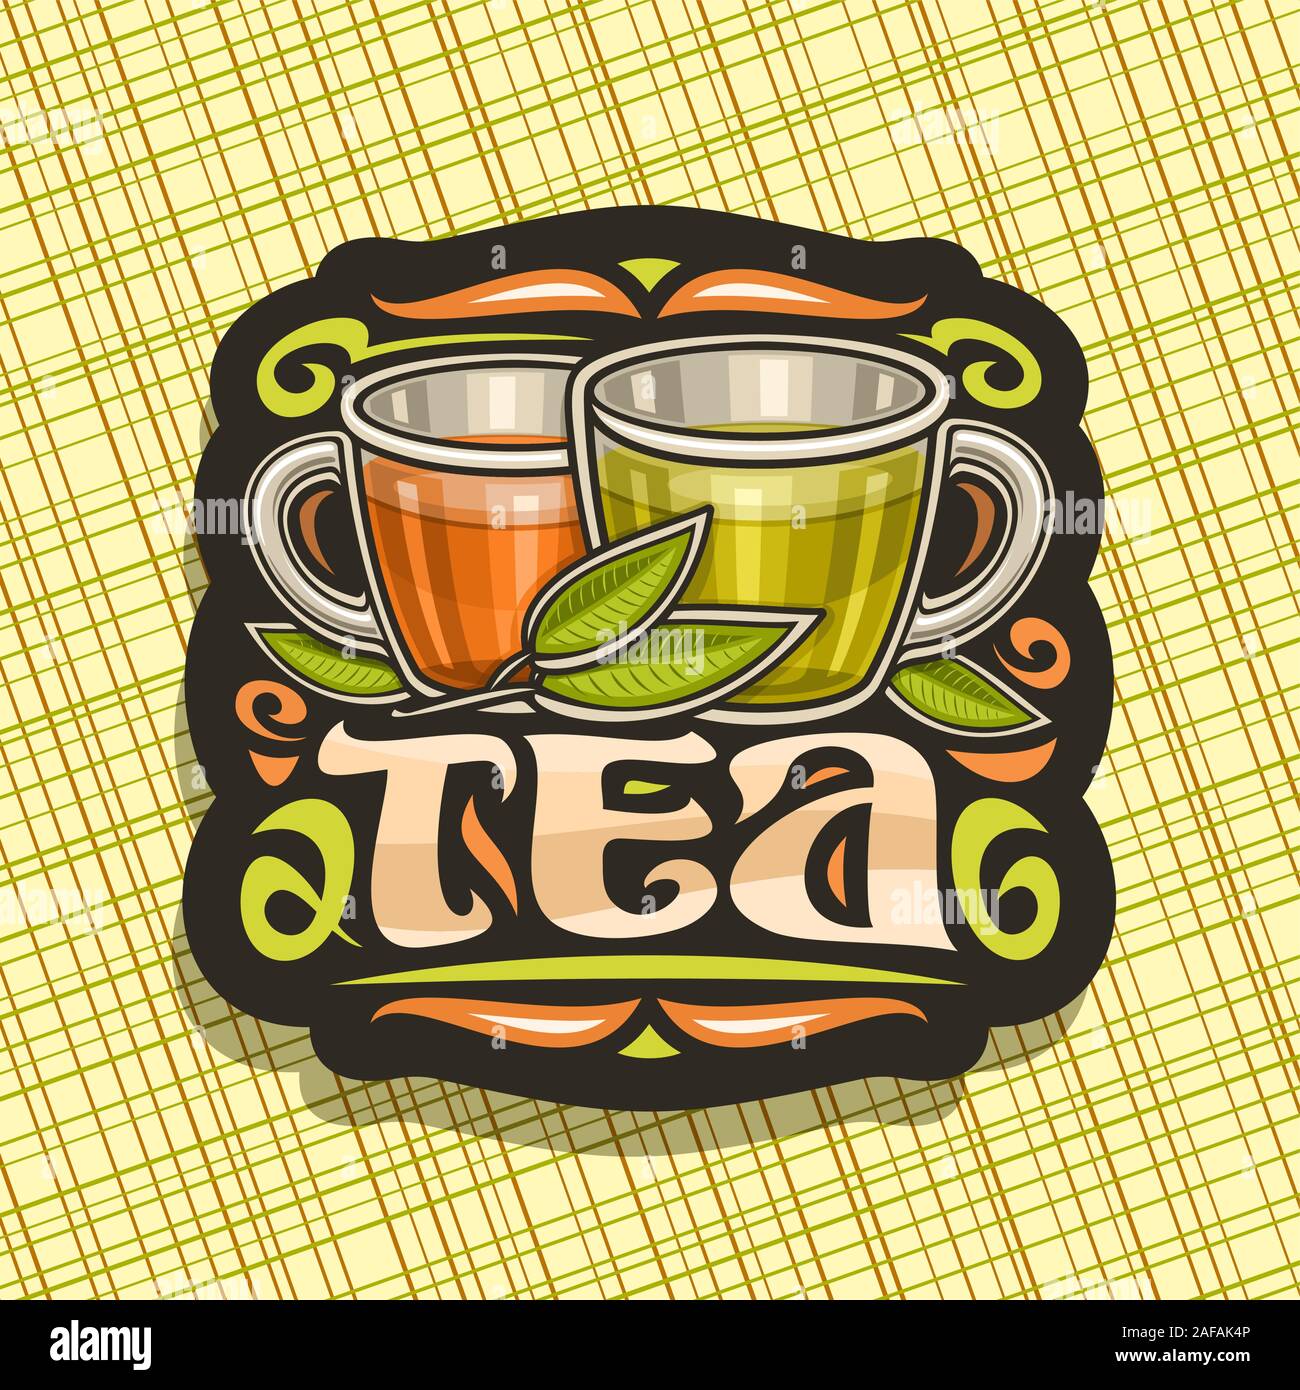 Vector logo for Tea, dark decorative badge with illustration of 2 glass cups with yellow and brown liquid, sprig of tea and flourishes, design signboa Stock Vector